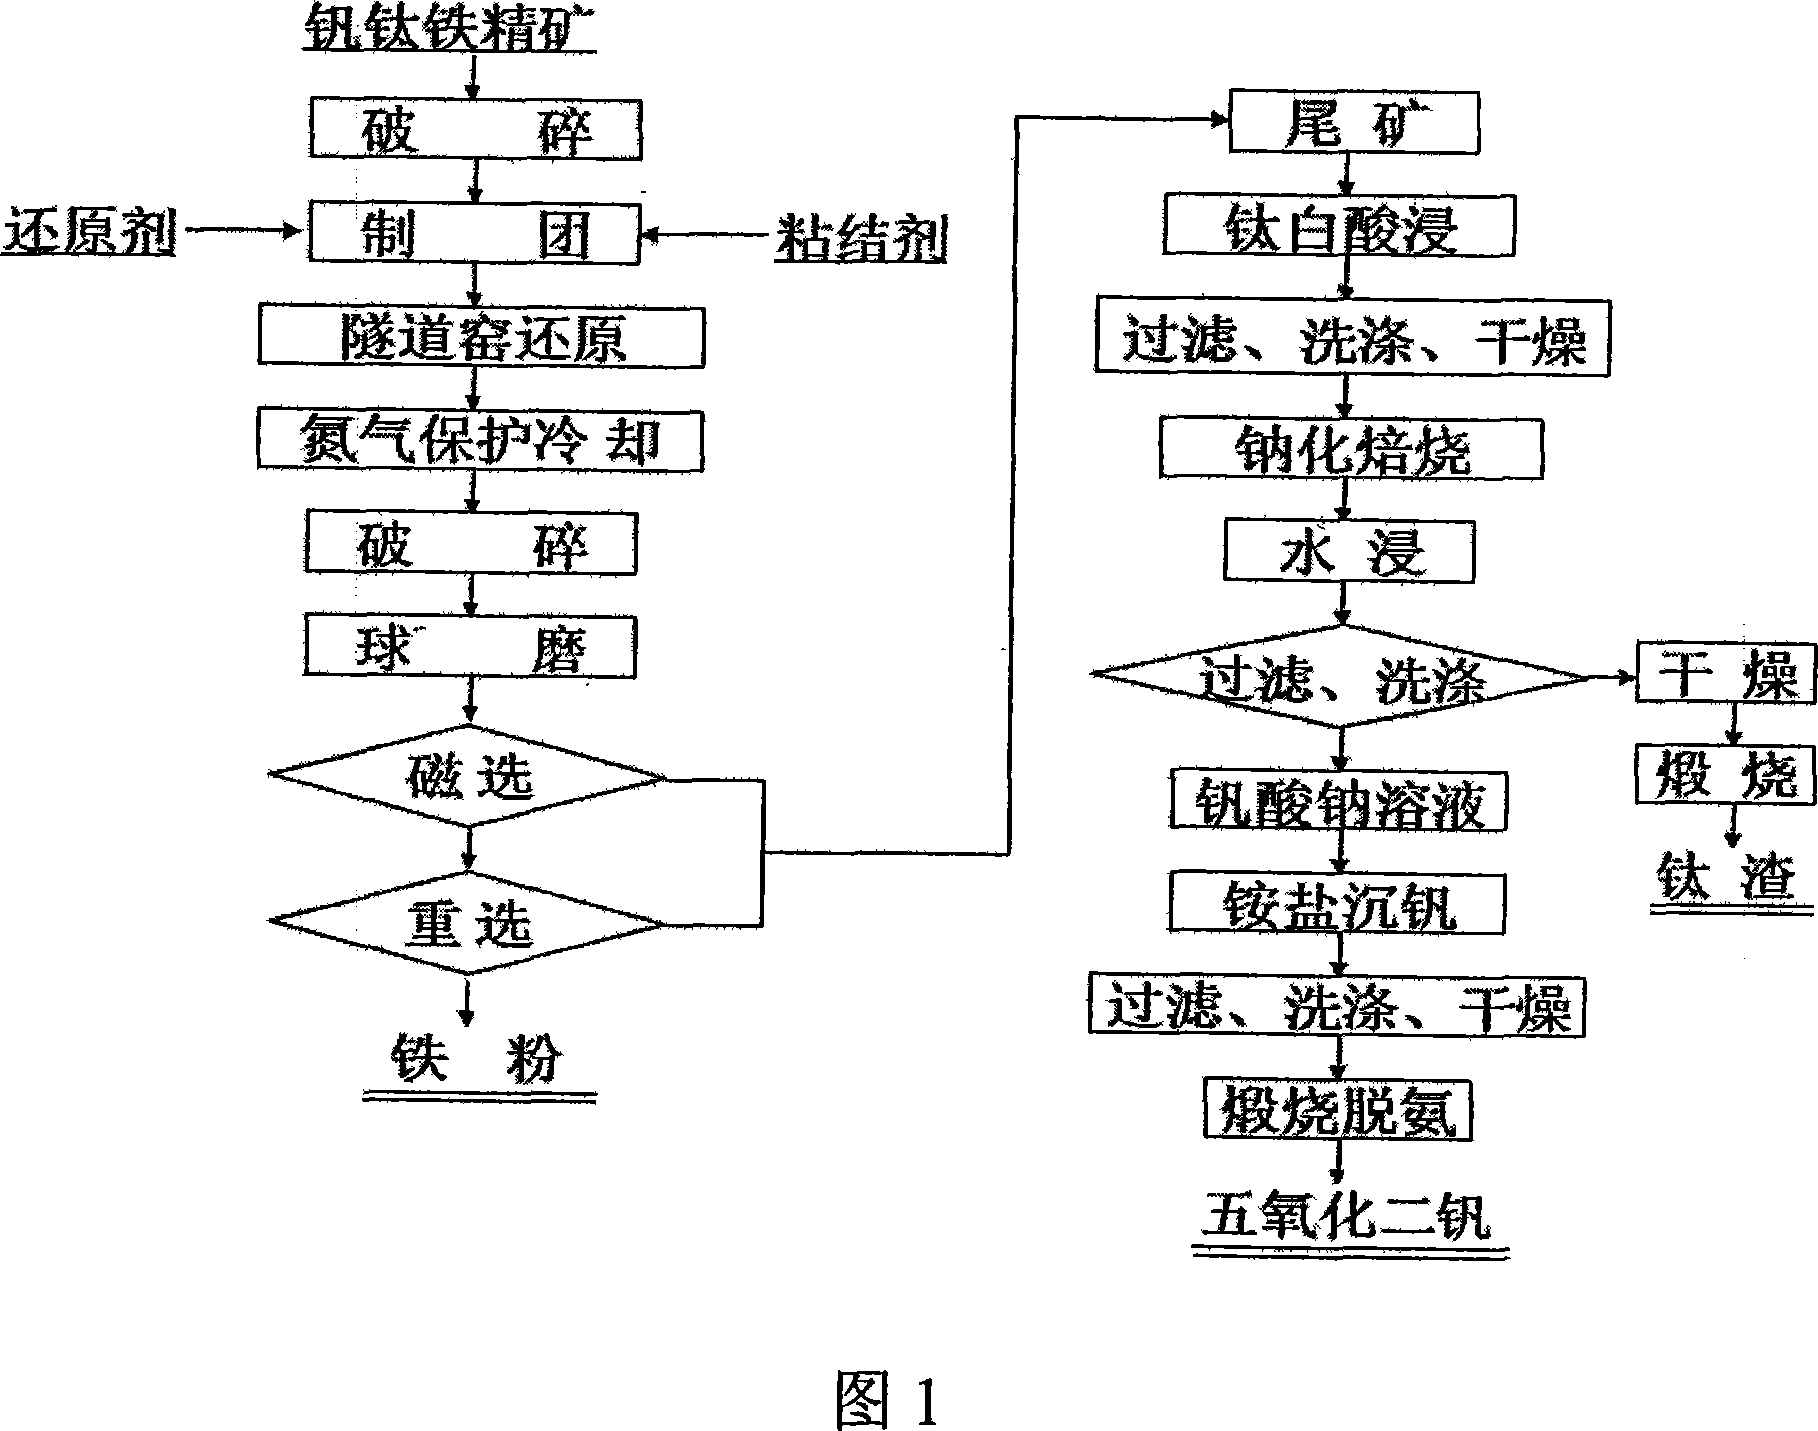 Method for comprehensive utilization of V-Ti-bearing iron ore concentrate by using tunnel kiln reduction-grinding - separation